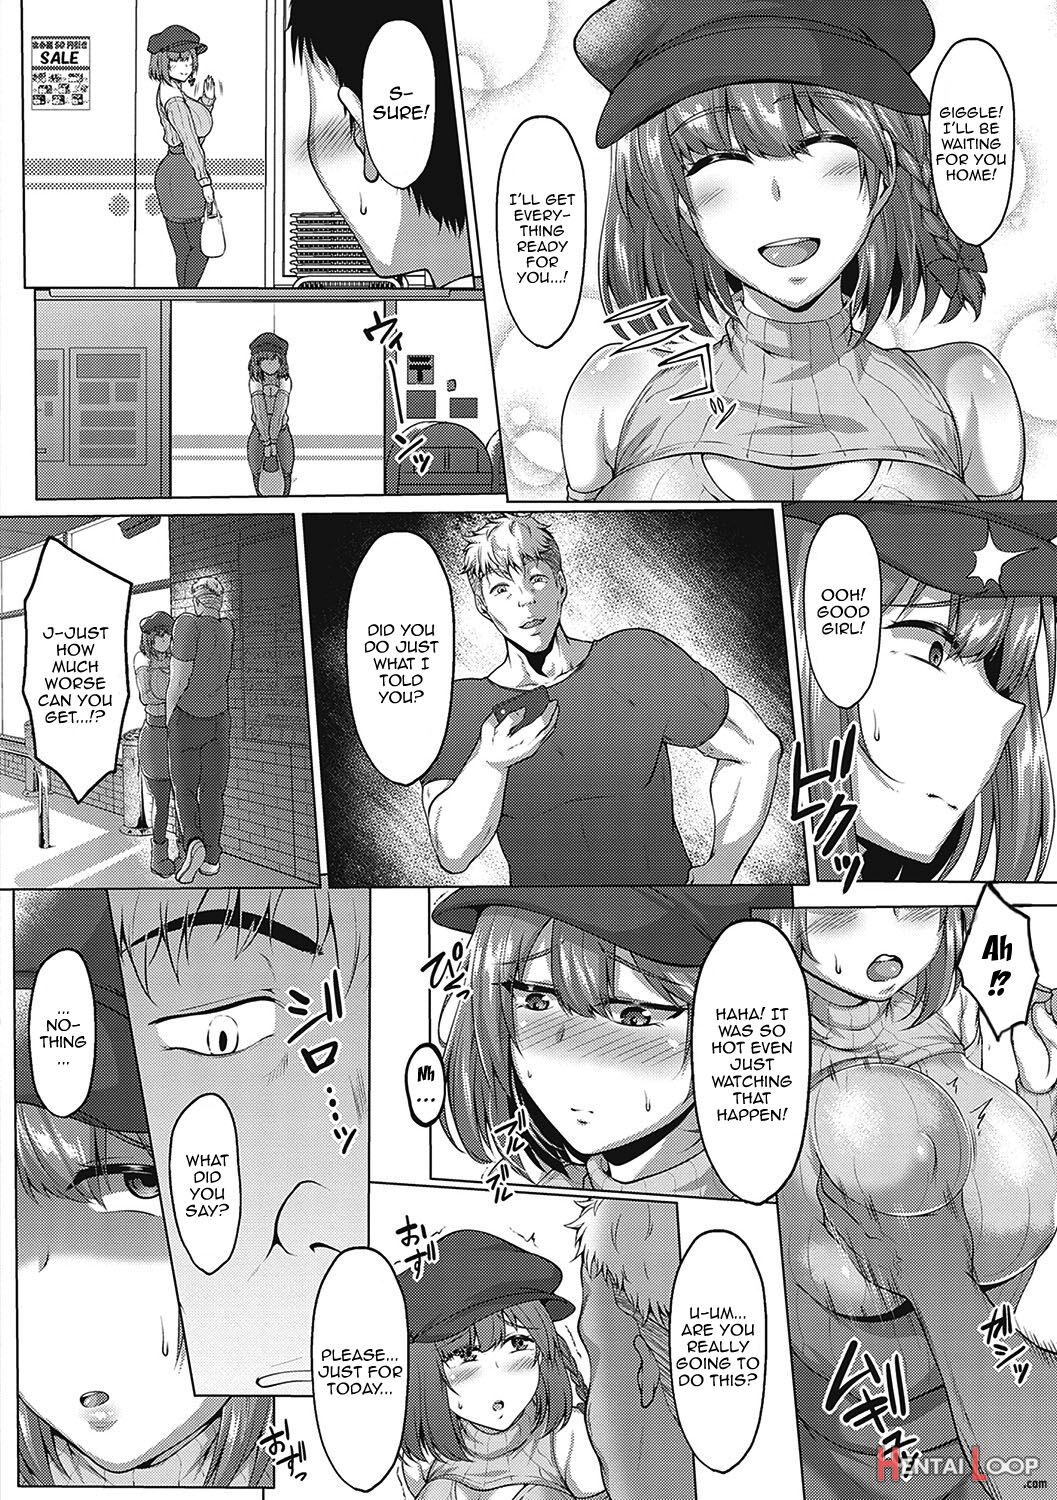 Thick Cock-loving Girls Ch. 1-5 page 21